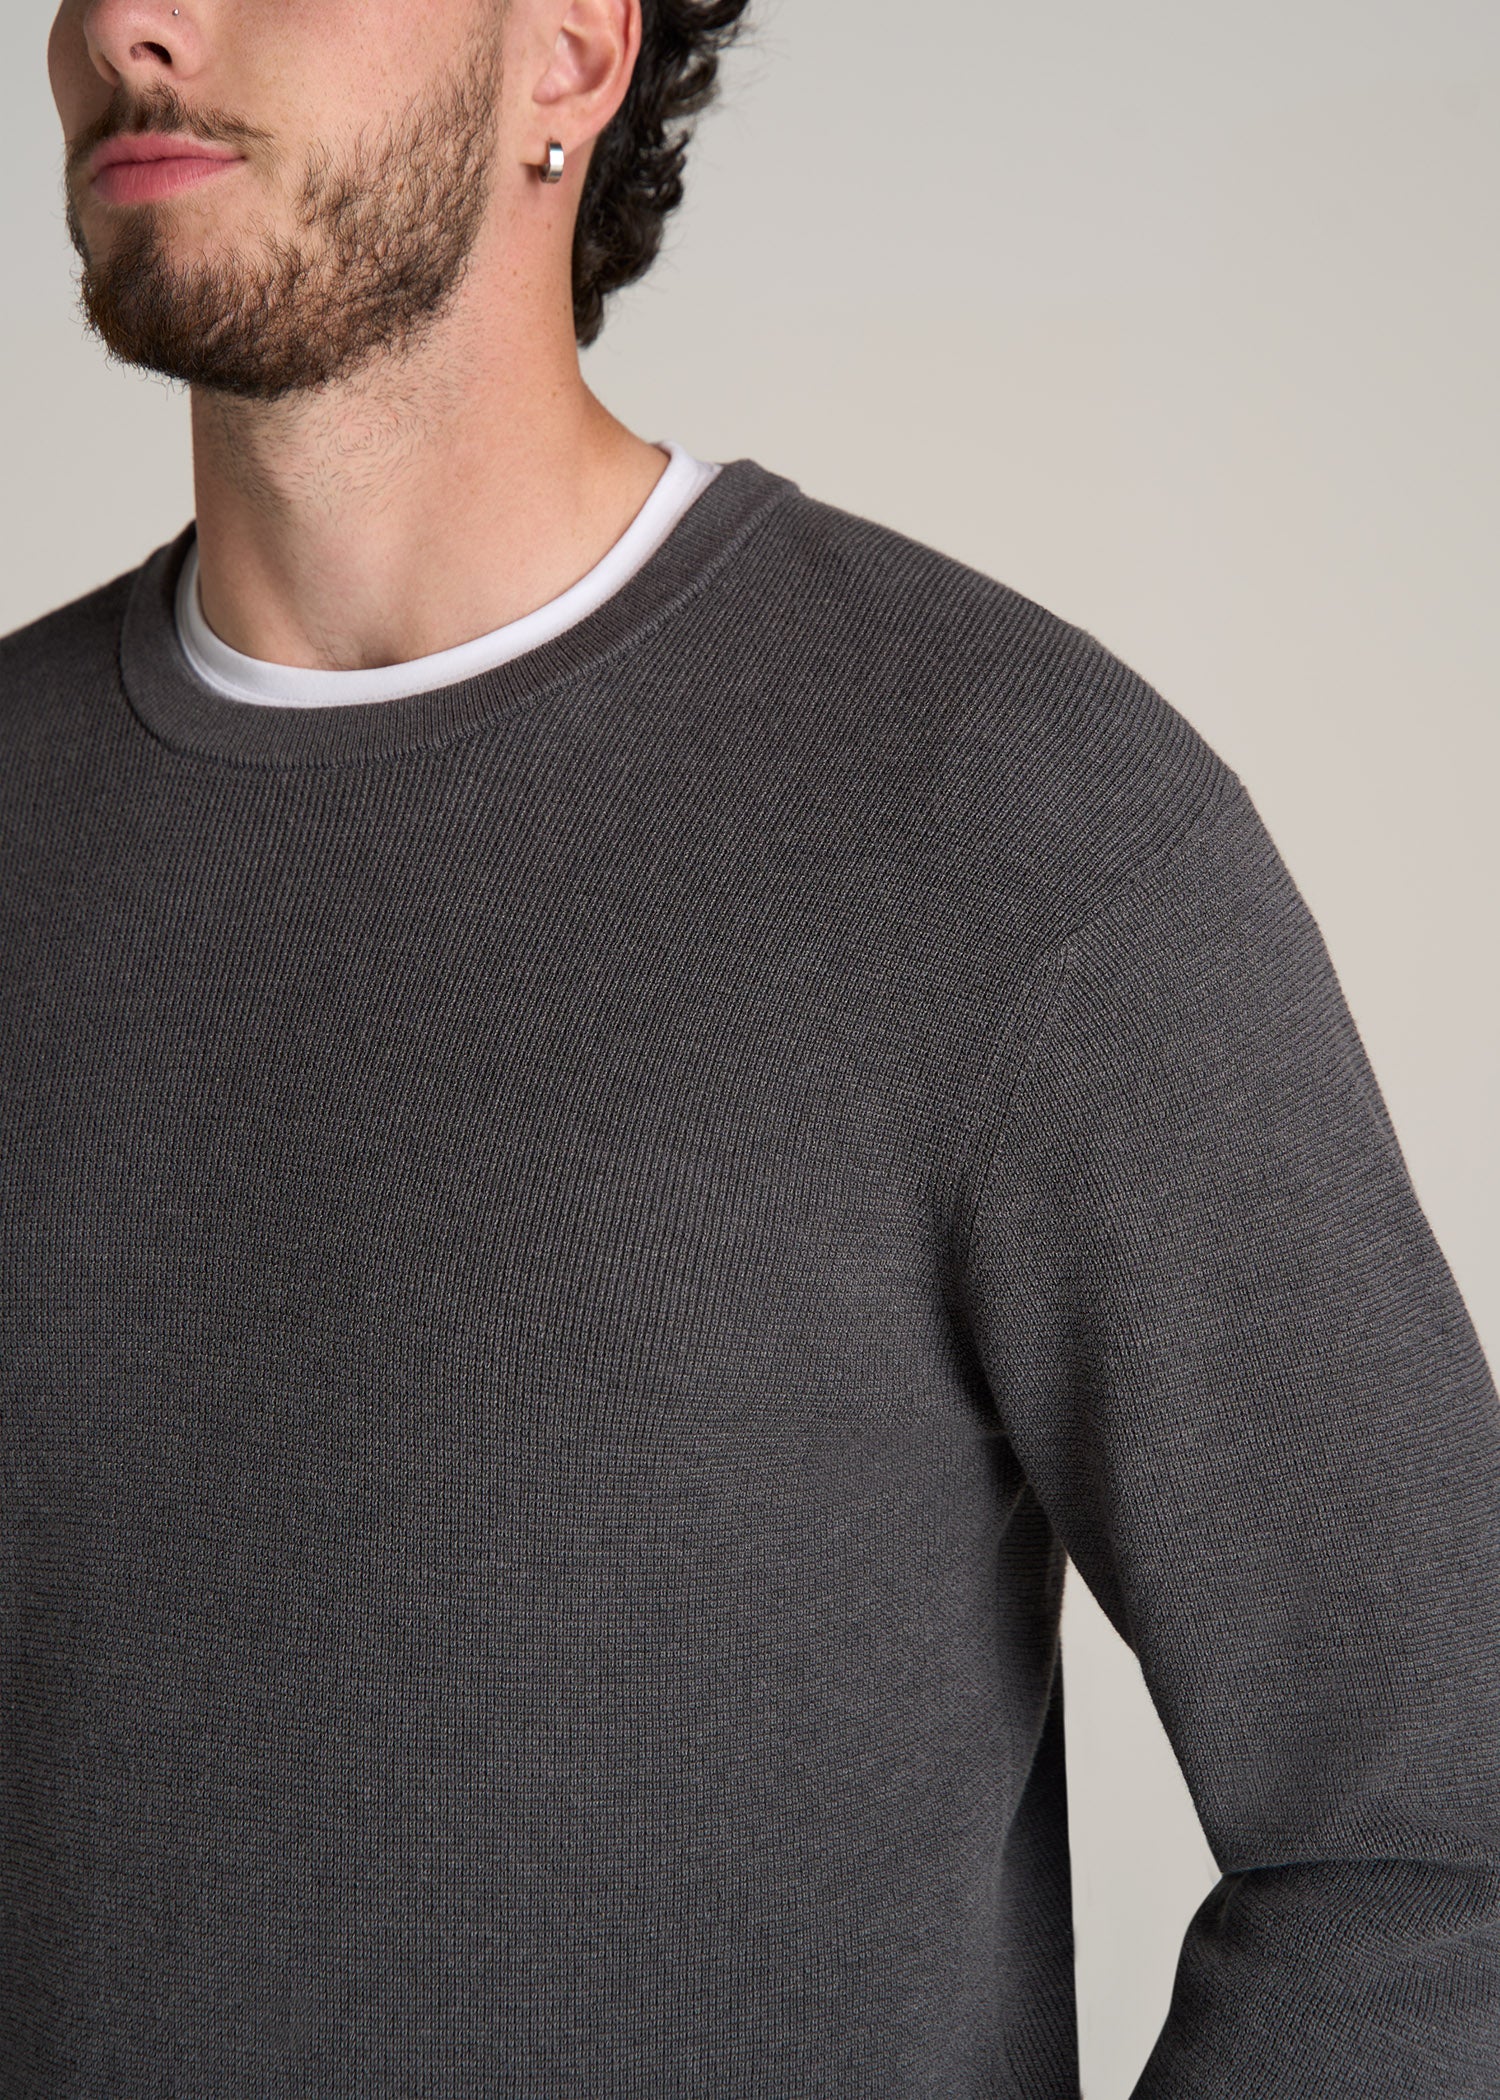 American-Tall-Men-Waffle-Knit-Sweater-Charcoal-Mix-detail